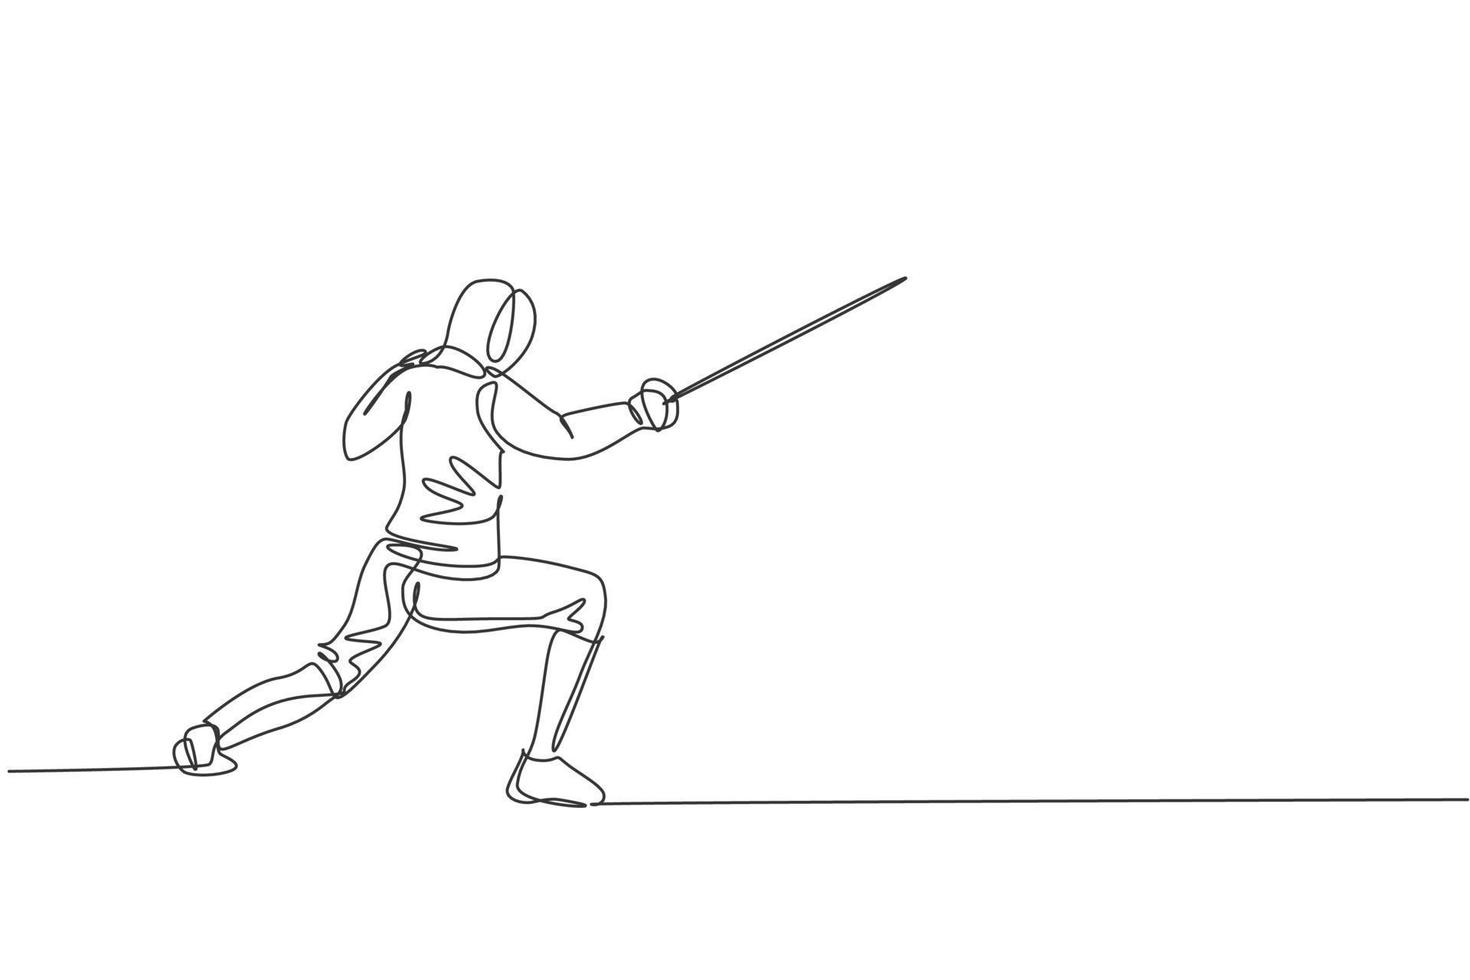 Single continuous line drawing young professional fencer athlete man in fencing mask and rapier. Competitive fighting sport competition concept. Trendy one line draw design vector graphic illustration